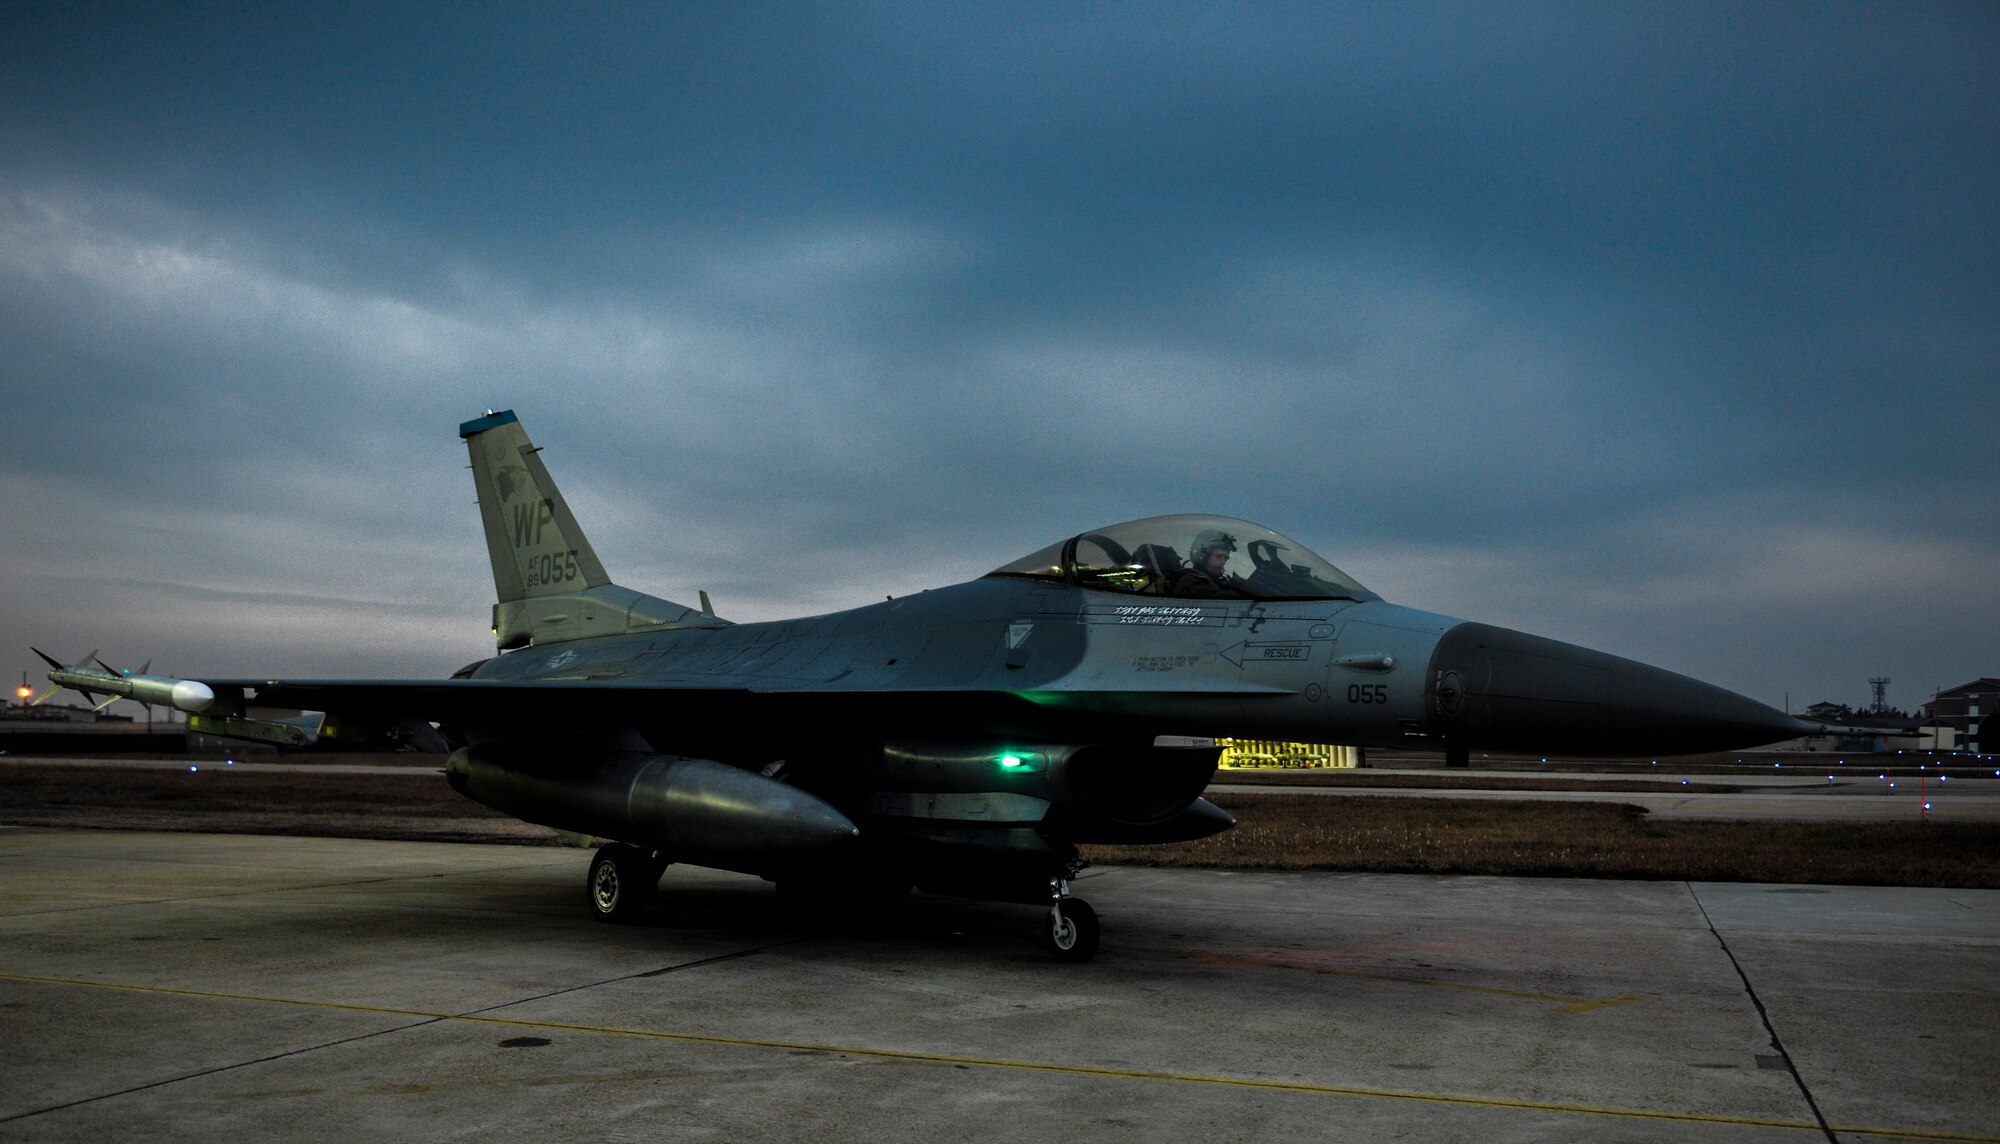 U.S. Air Force Capt. Erik Kitaif, 35th Fighter Squadron pilot, parks an F-16 Fighting Falcon outside of its hangar bay at Kunsan Air Base, Republic of Korea, Dec. 4, 2016. U.S. and ROK airmen train together regularly to increase interoperability and ultimately enhances U.S. and ROK commitments to maintain peace in the region. (U.S. Air Force photo by Senior Airman Colville McFee/Released)